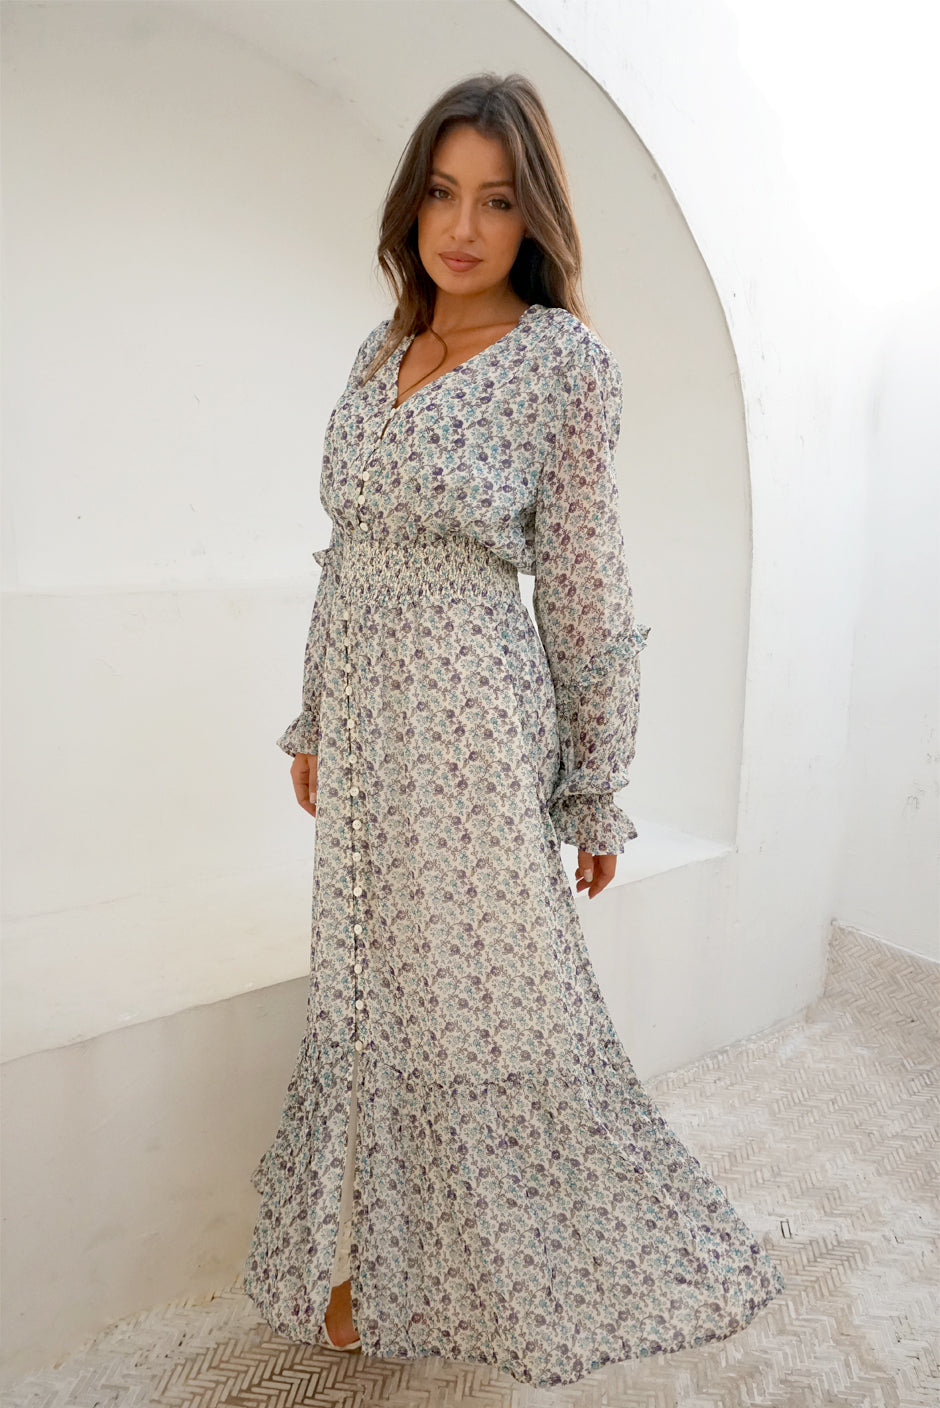 White/Blue/Purple Floral Print Long Sleeve Women's Aria Ankle-lenght Maxi Dress from Paneros Clothing with 100% certified sustainable fabric, ruffles, button-up front, and smocking. Front View.